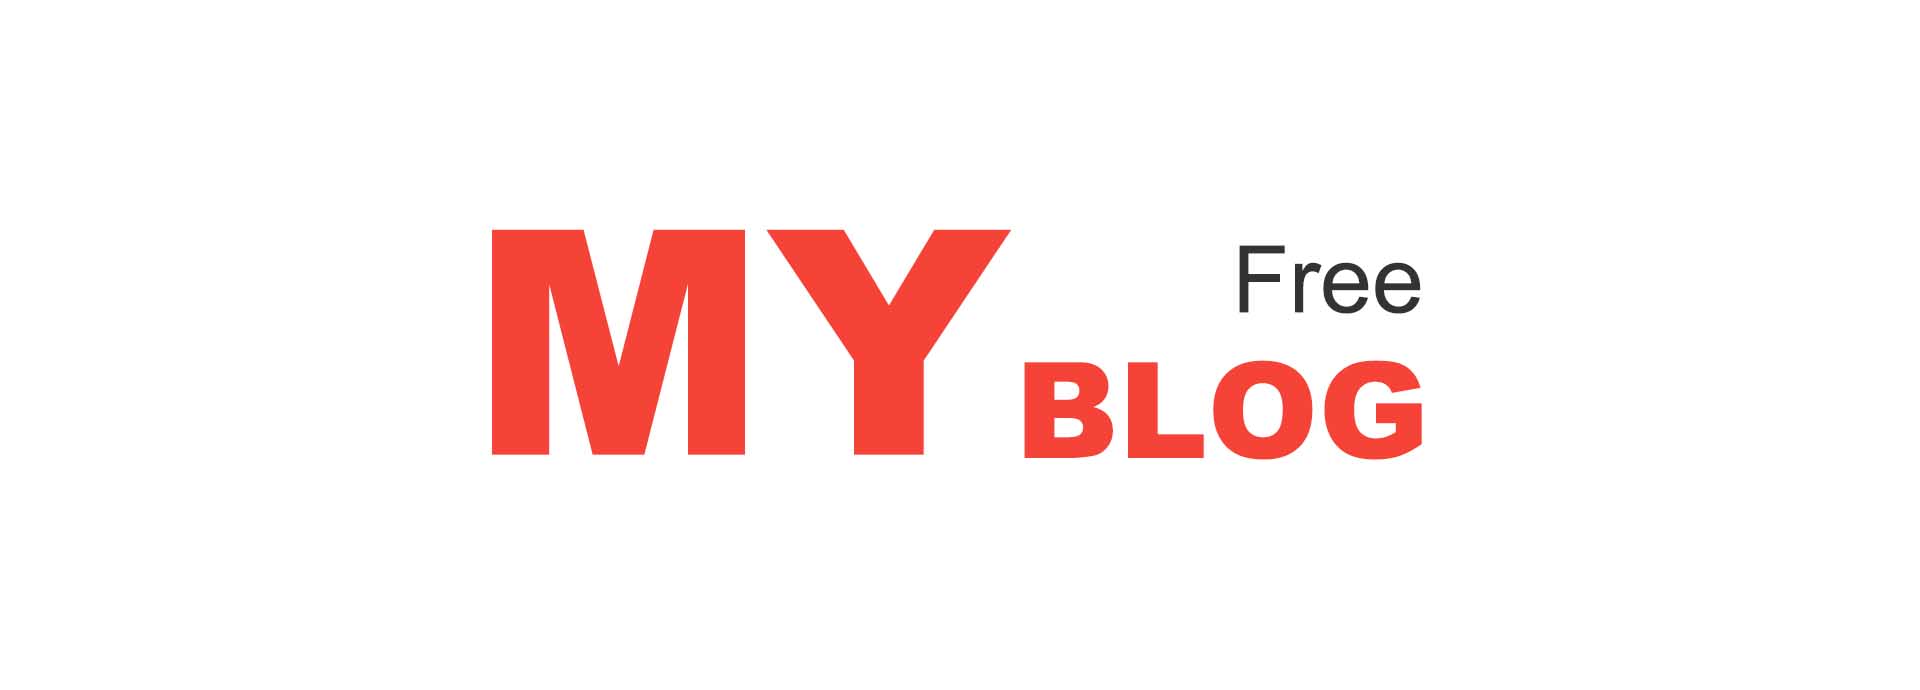 Submit a Guest Post on myfreeblog.us